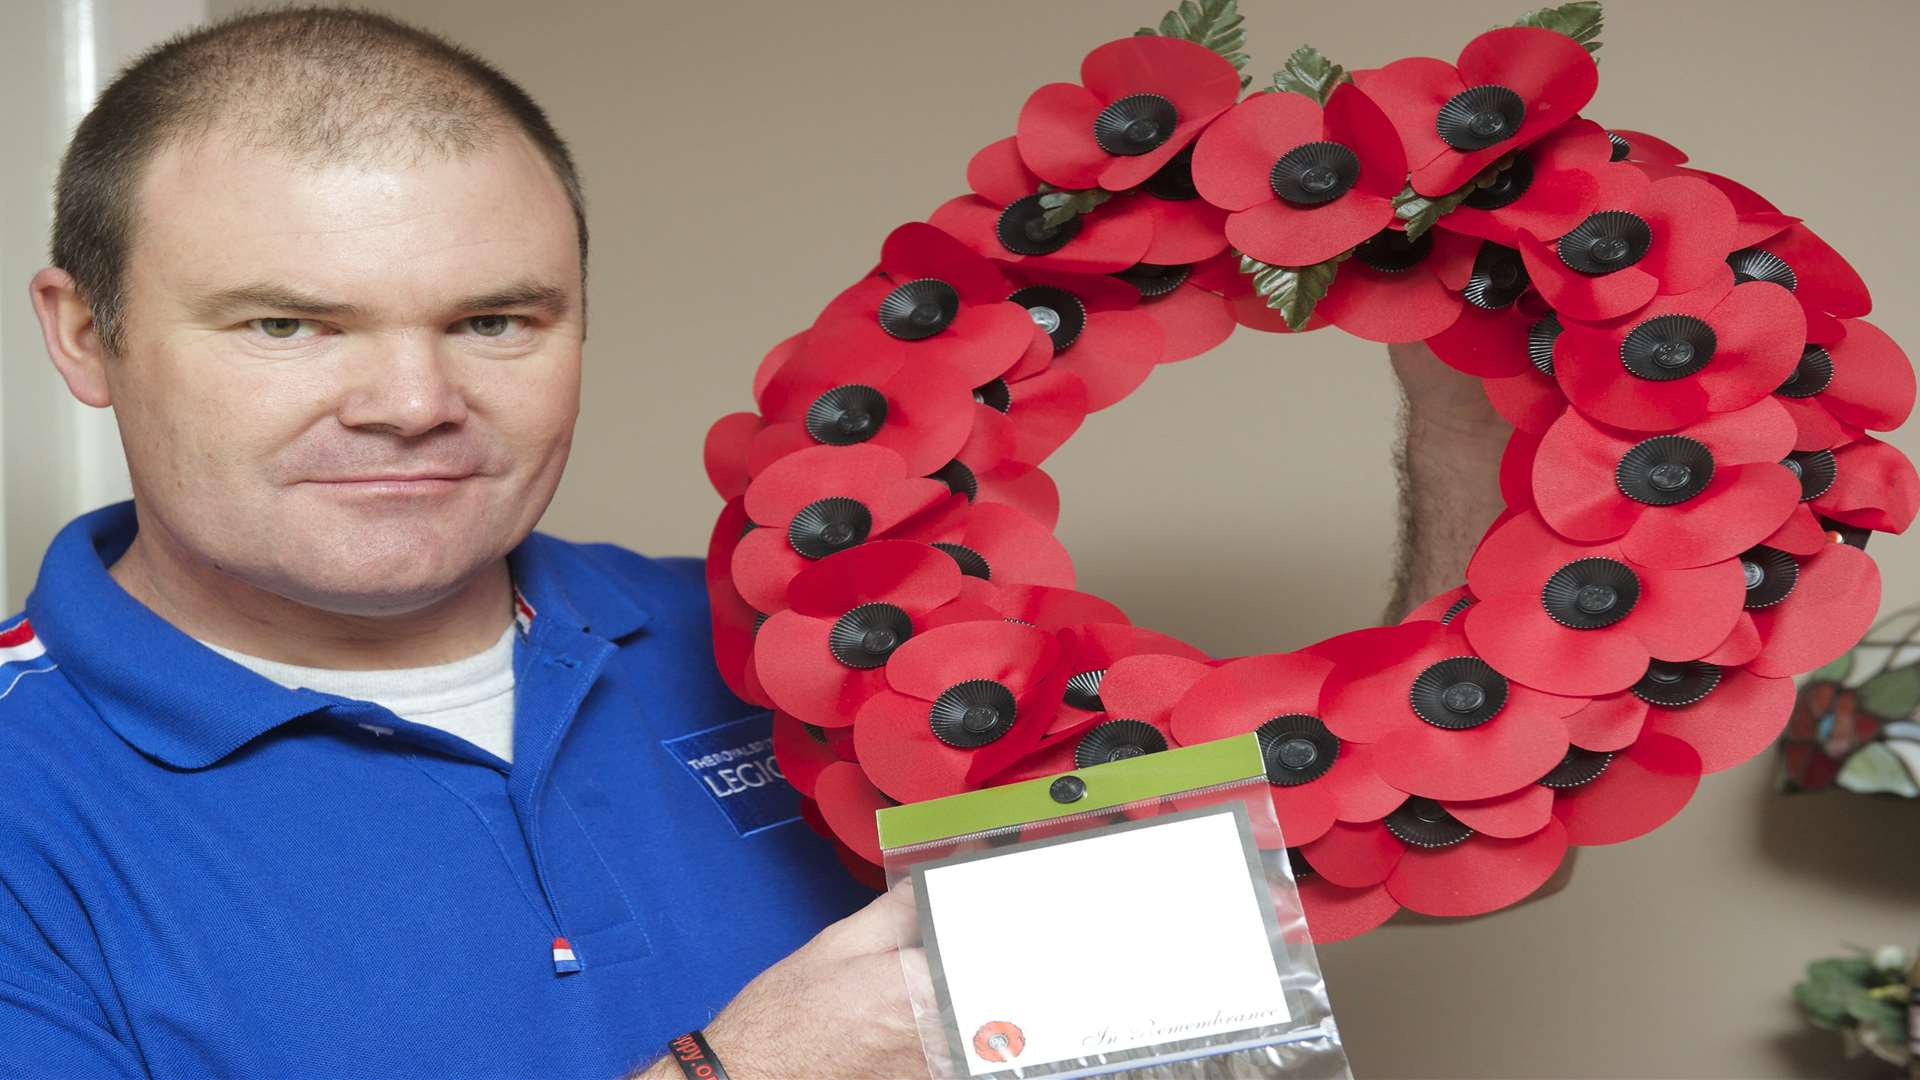 David Taylor, of Coldharbour Road, Northfleet, is the Poppy Appeal Organiser for Gravesend.